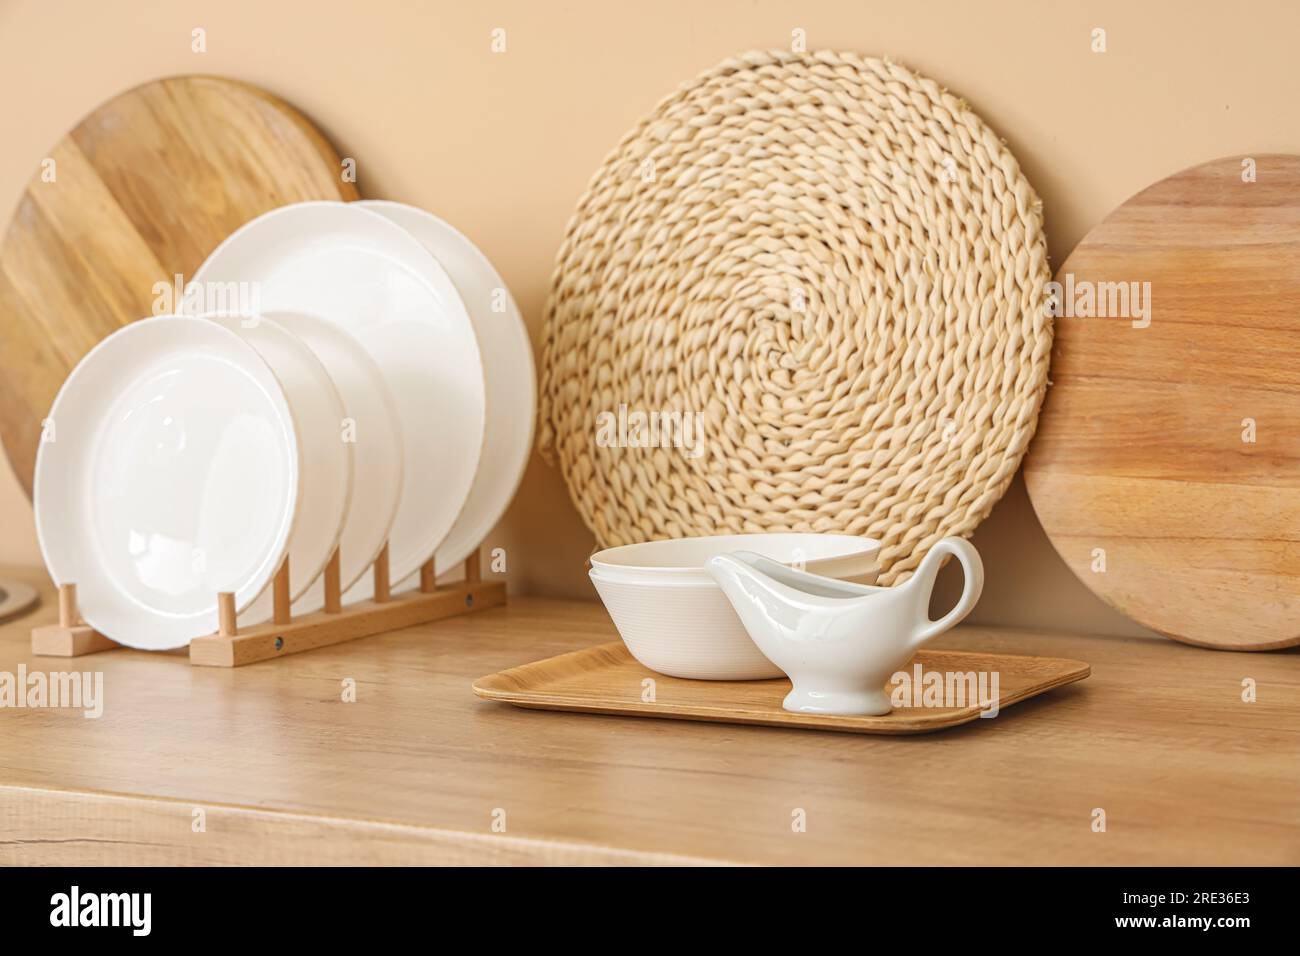 Kitchen counter with plate rack, clean dishes and cutting boards Stock Photo